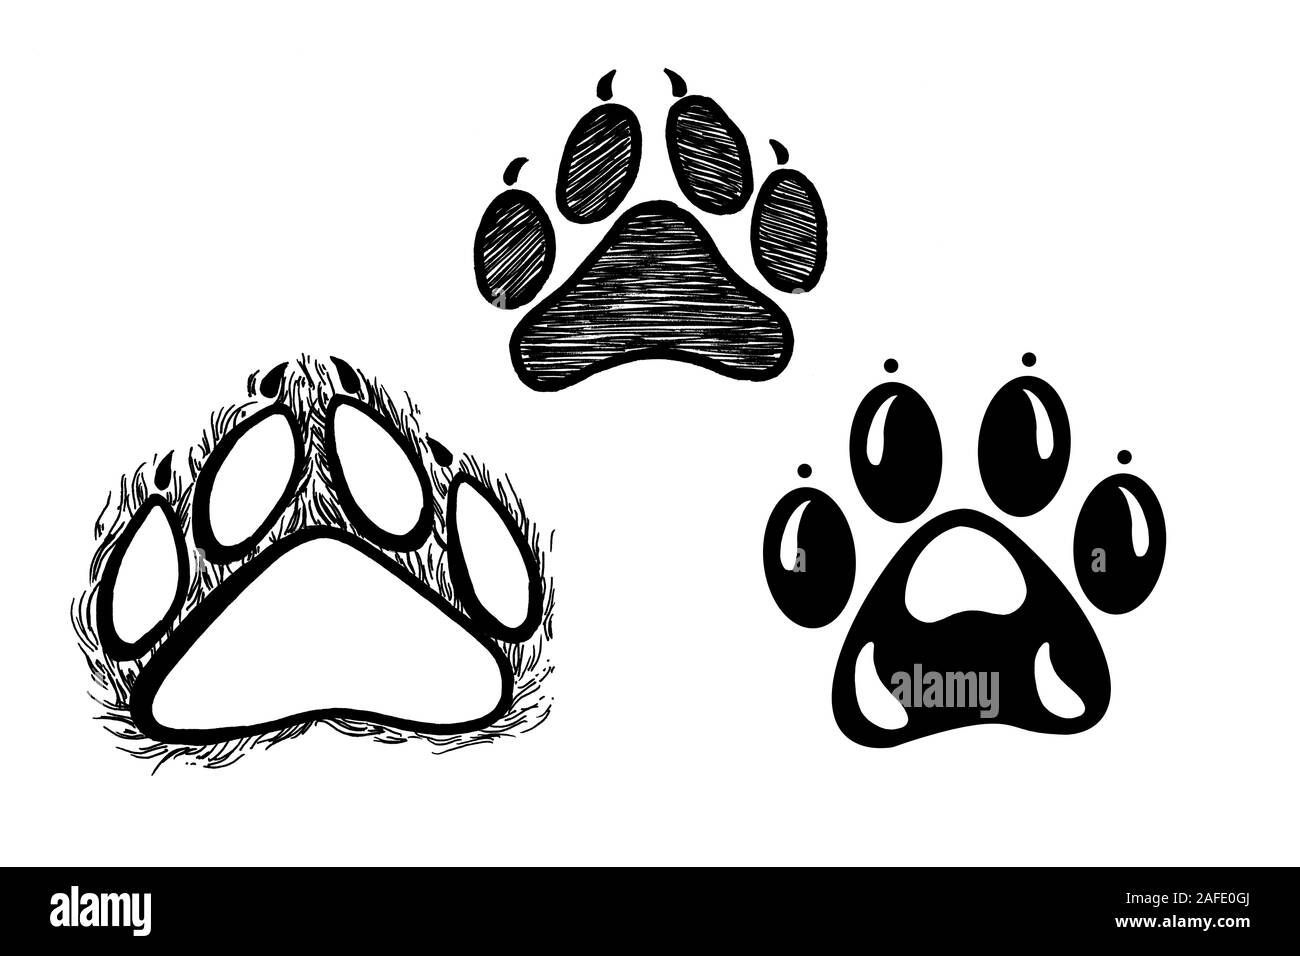 How to draw dog paws | Dog Paw Drawing - YouTube